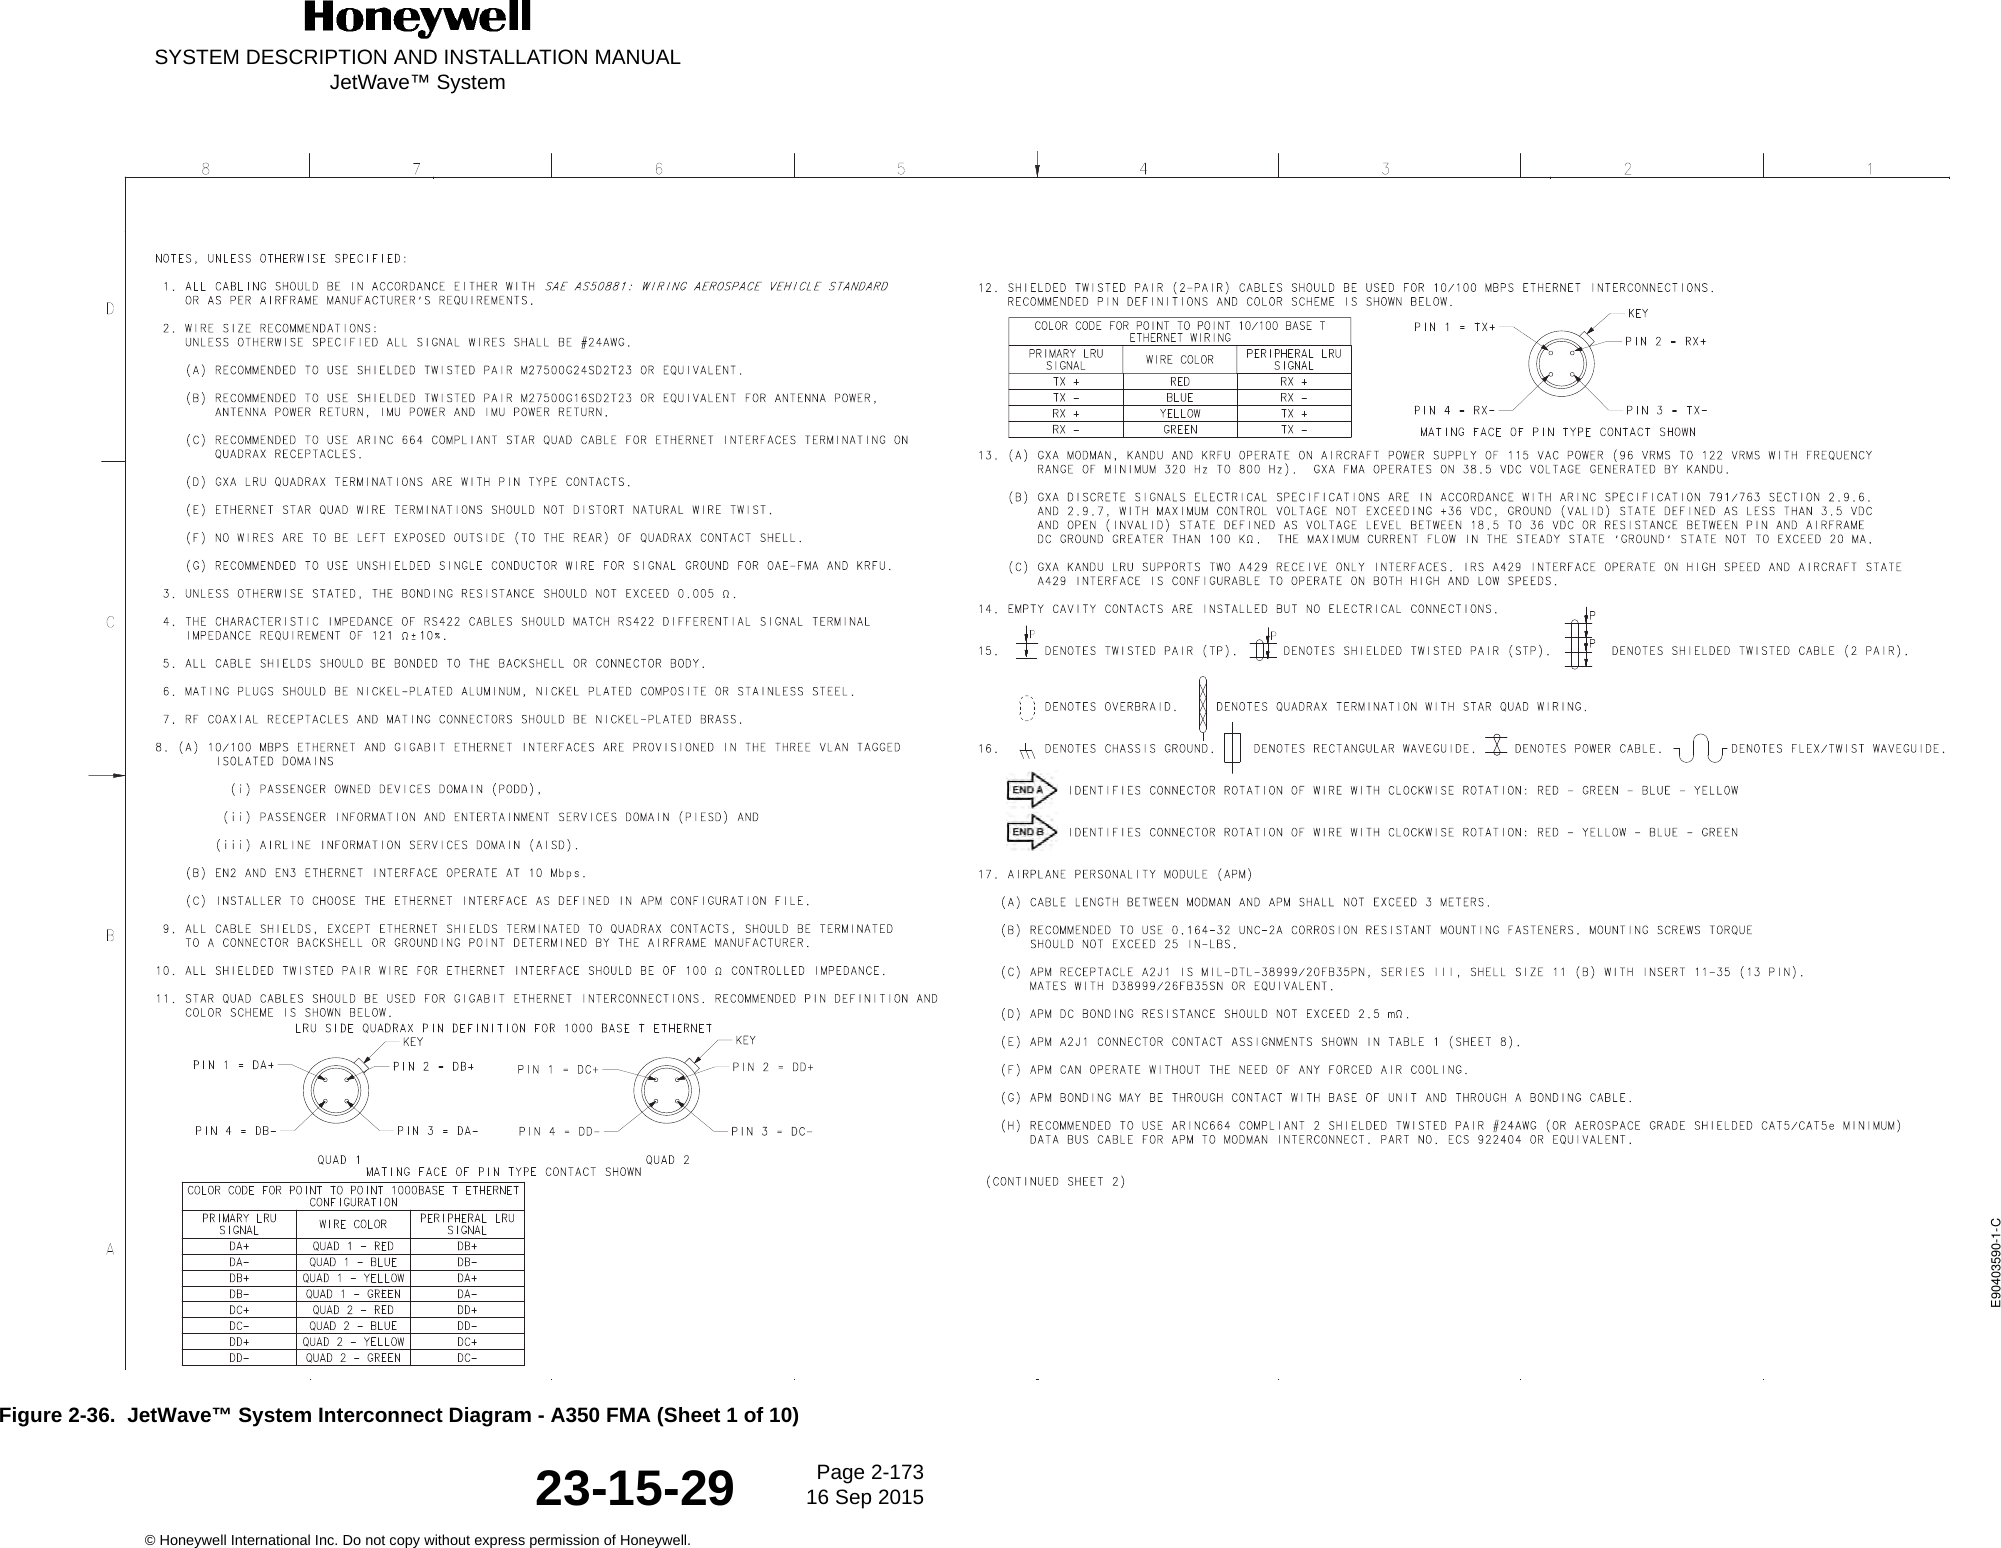 SYSTEM DESCRIPTION AND INSTALLATION MANUALJetWave™ SystemPage 2-173 16 Sep 2015© Honeywell International Inc. Do not copy without express permission of Honeywell.23-15-29Figure 2-36.  JetWave™ System Interconnect Diagram - A350 FMA (Sheet 1 of 10)E90403590-1-C